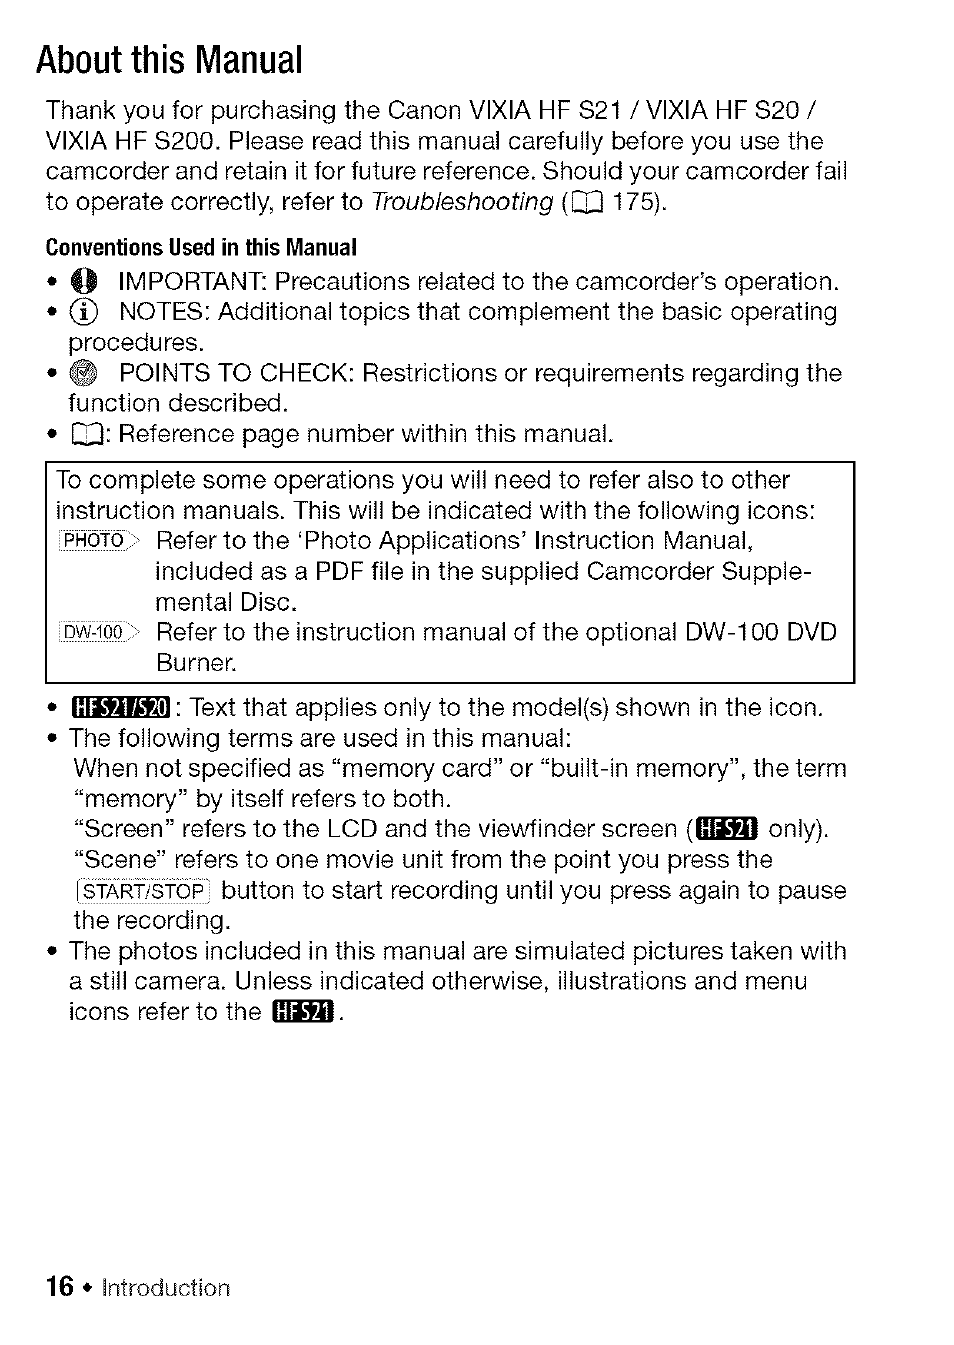 About this manual | Canon HF S21 User Manual | Page 16 / 104